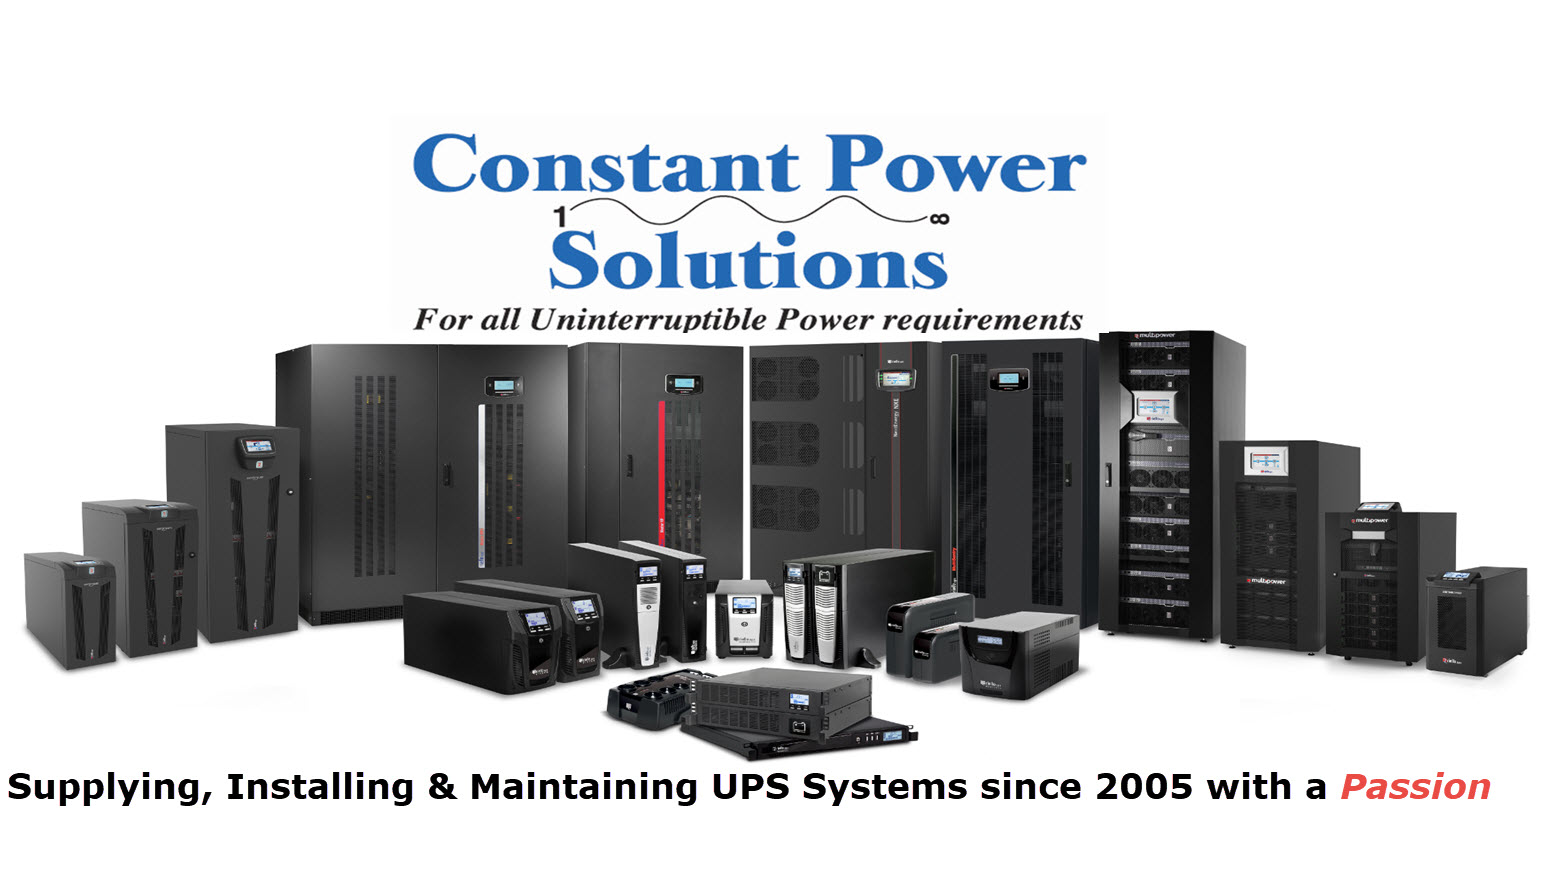 Constant Power Solutions since 2005